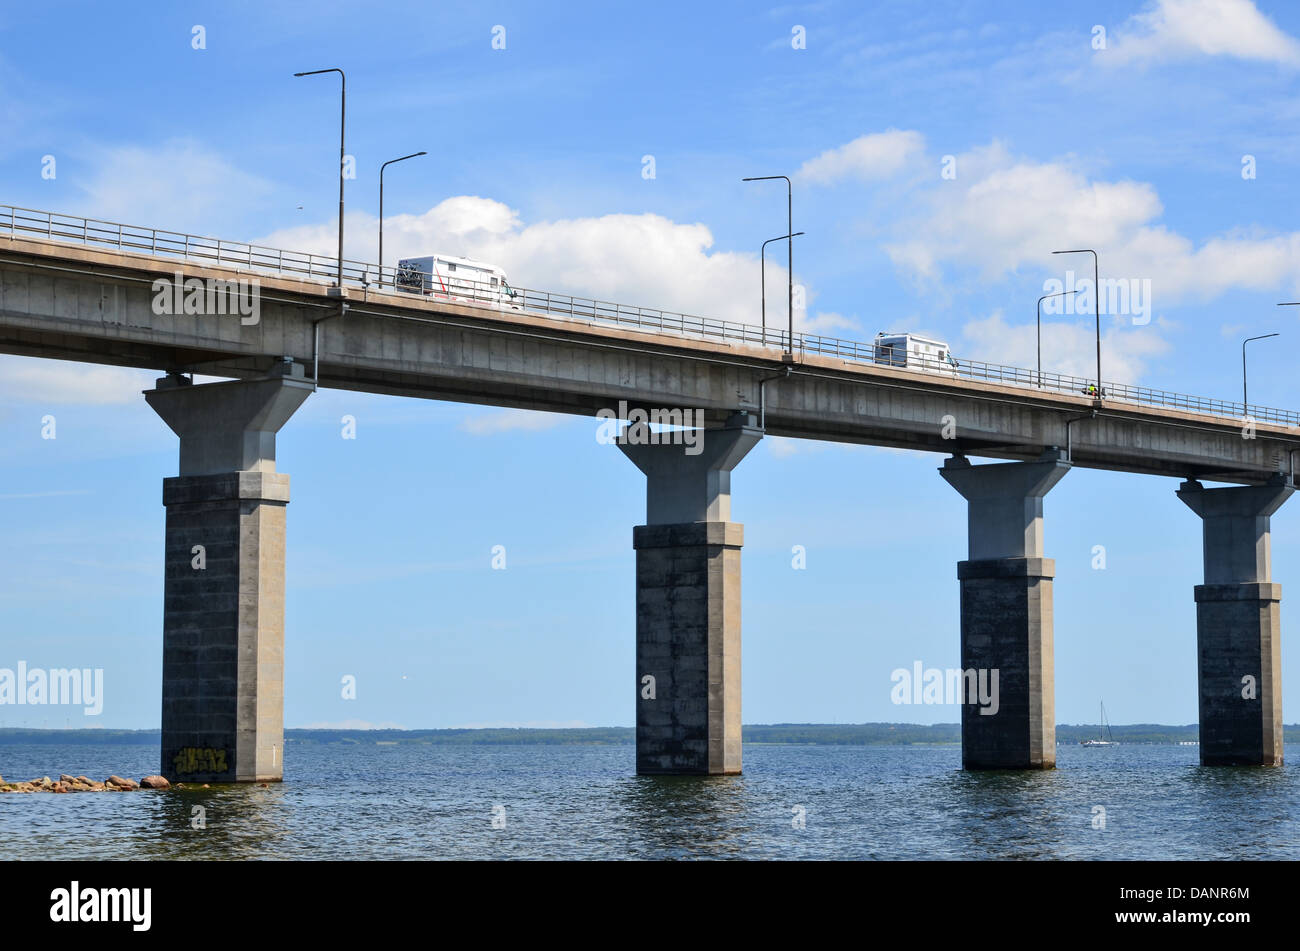 Tourists on their way to the island Oland on the bridge from mainland Sweden. Stock Photo